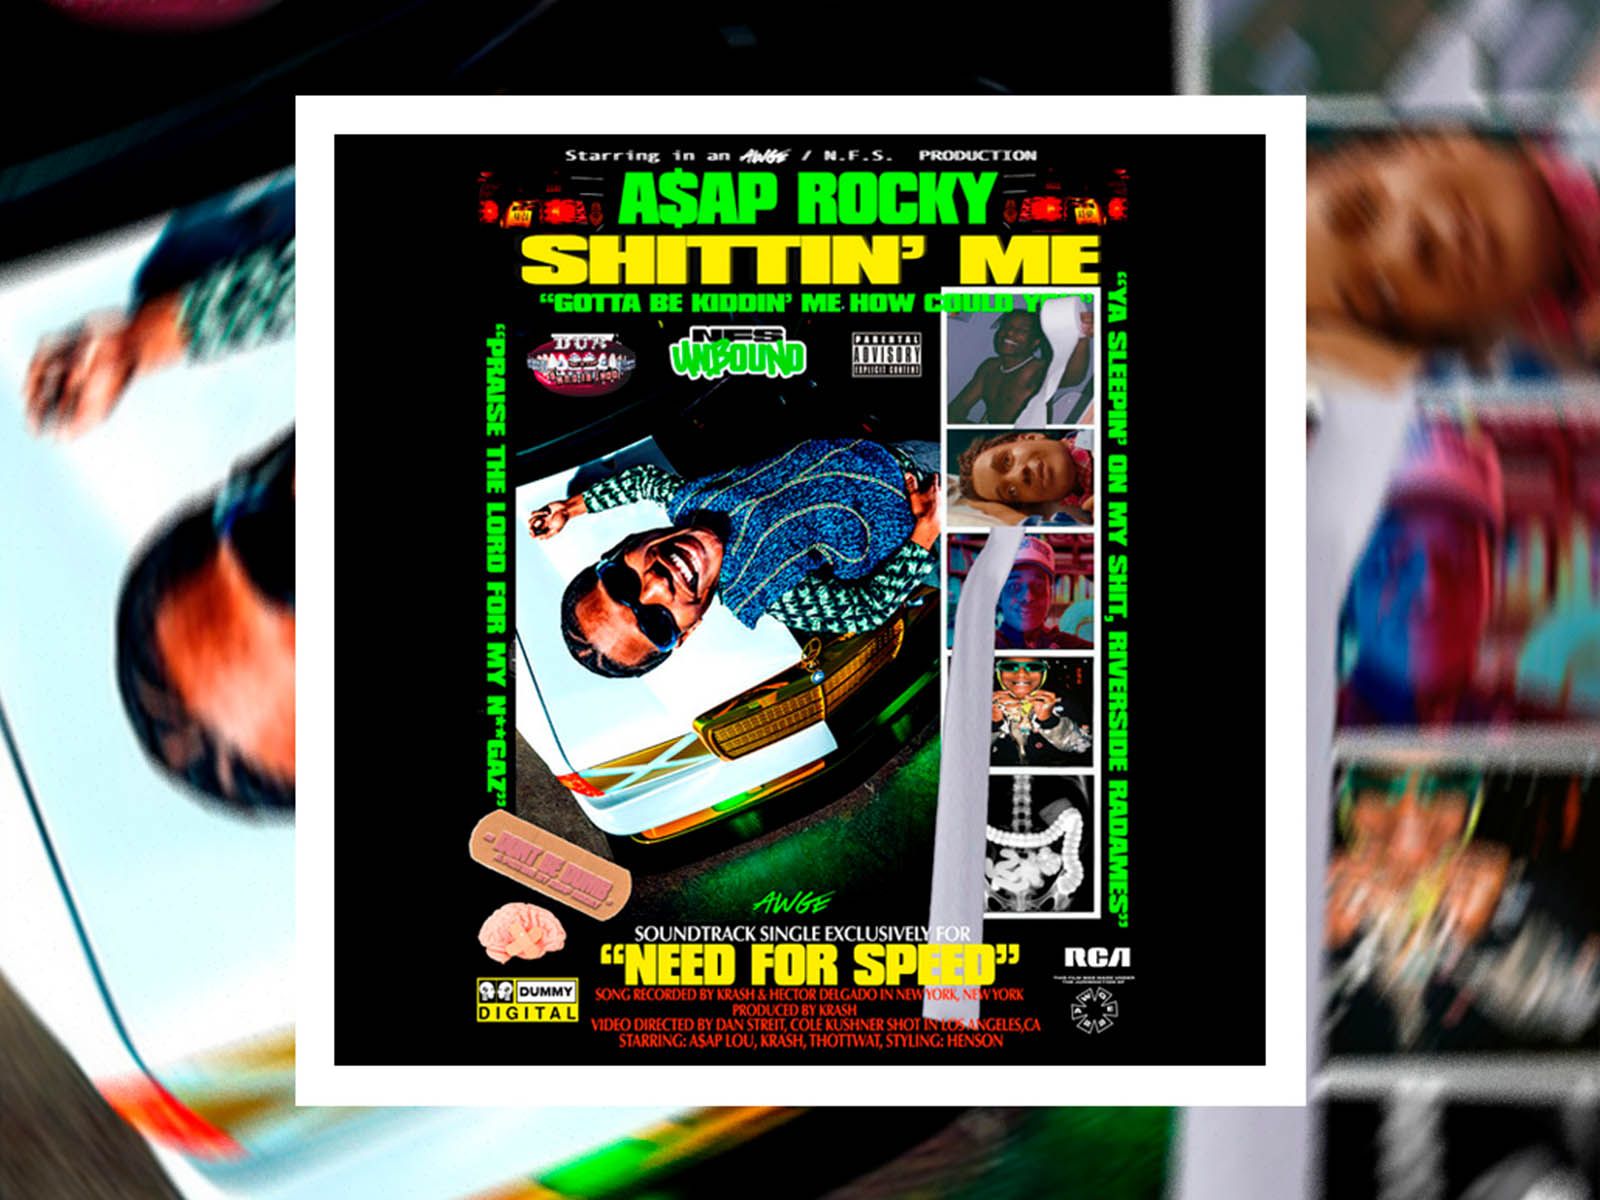 A$AP Rocky officially releases “Shittin’ Me”